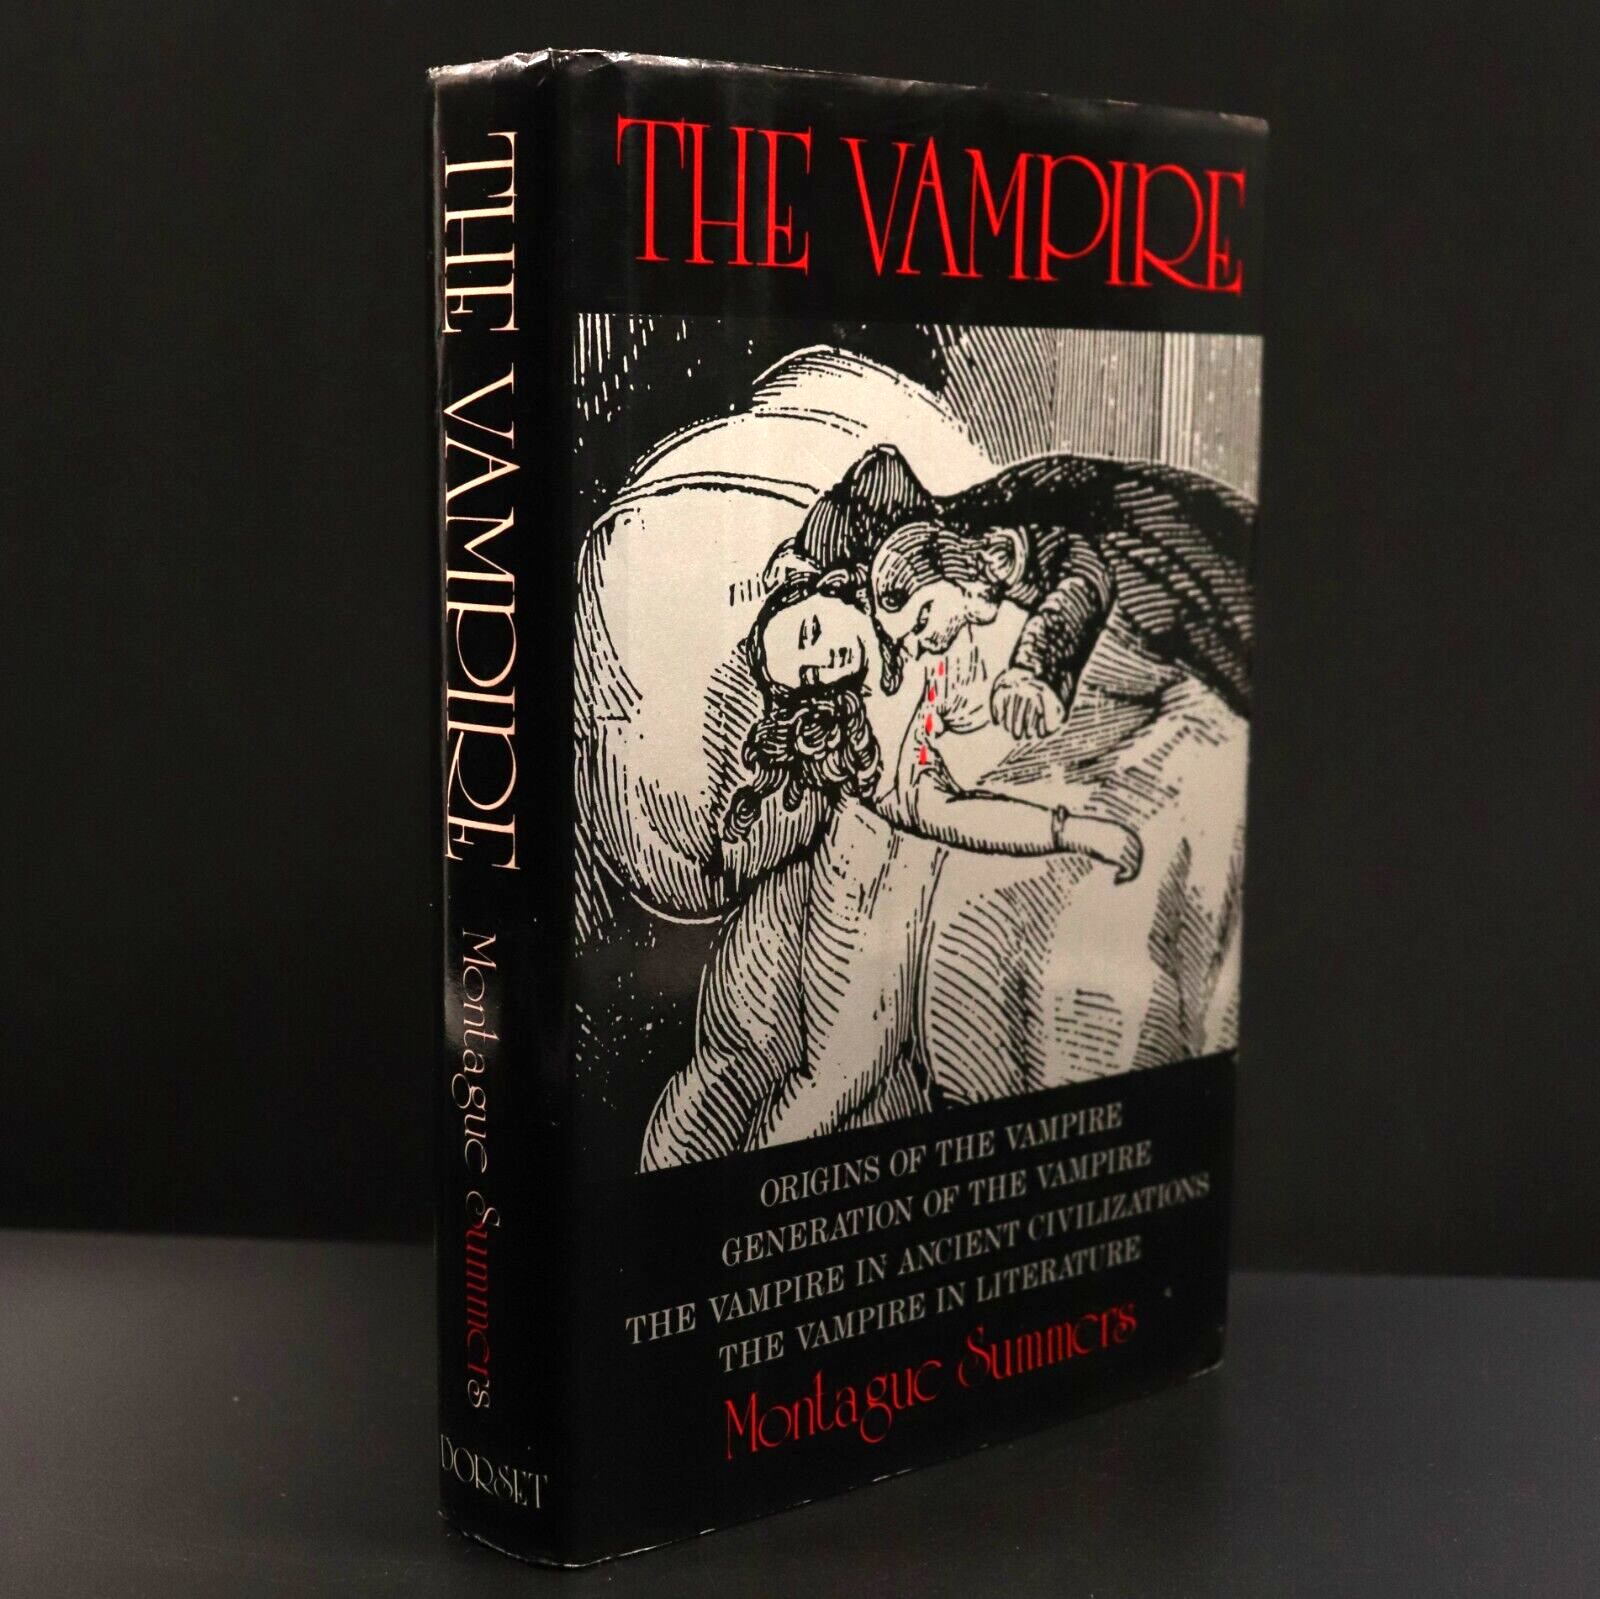 1991 The Vampire by Montague Summers Occult History & Reference Book Vampires